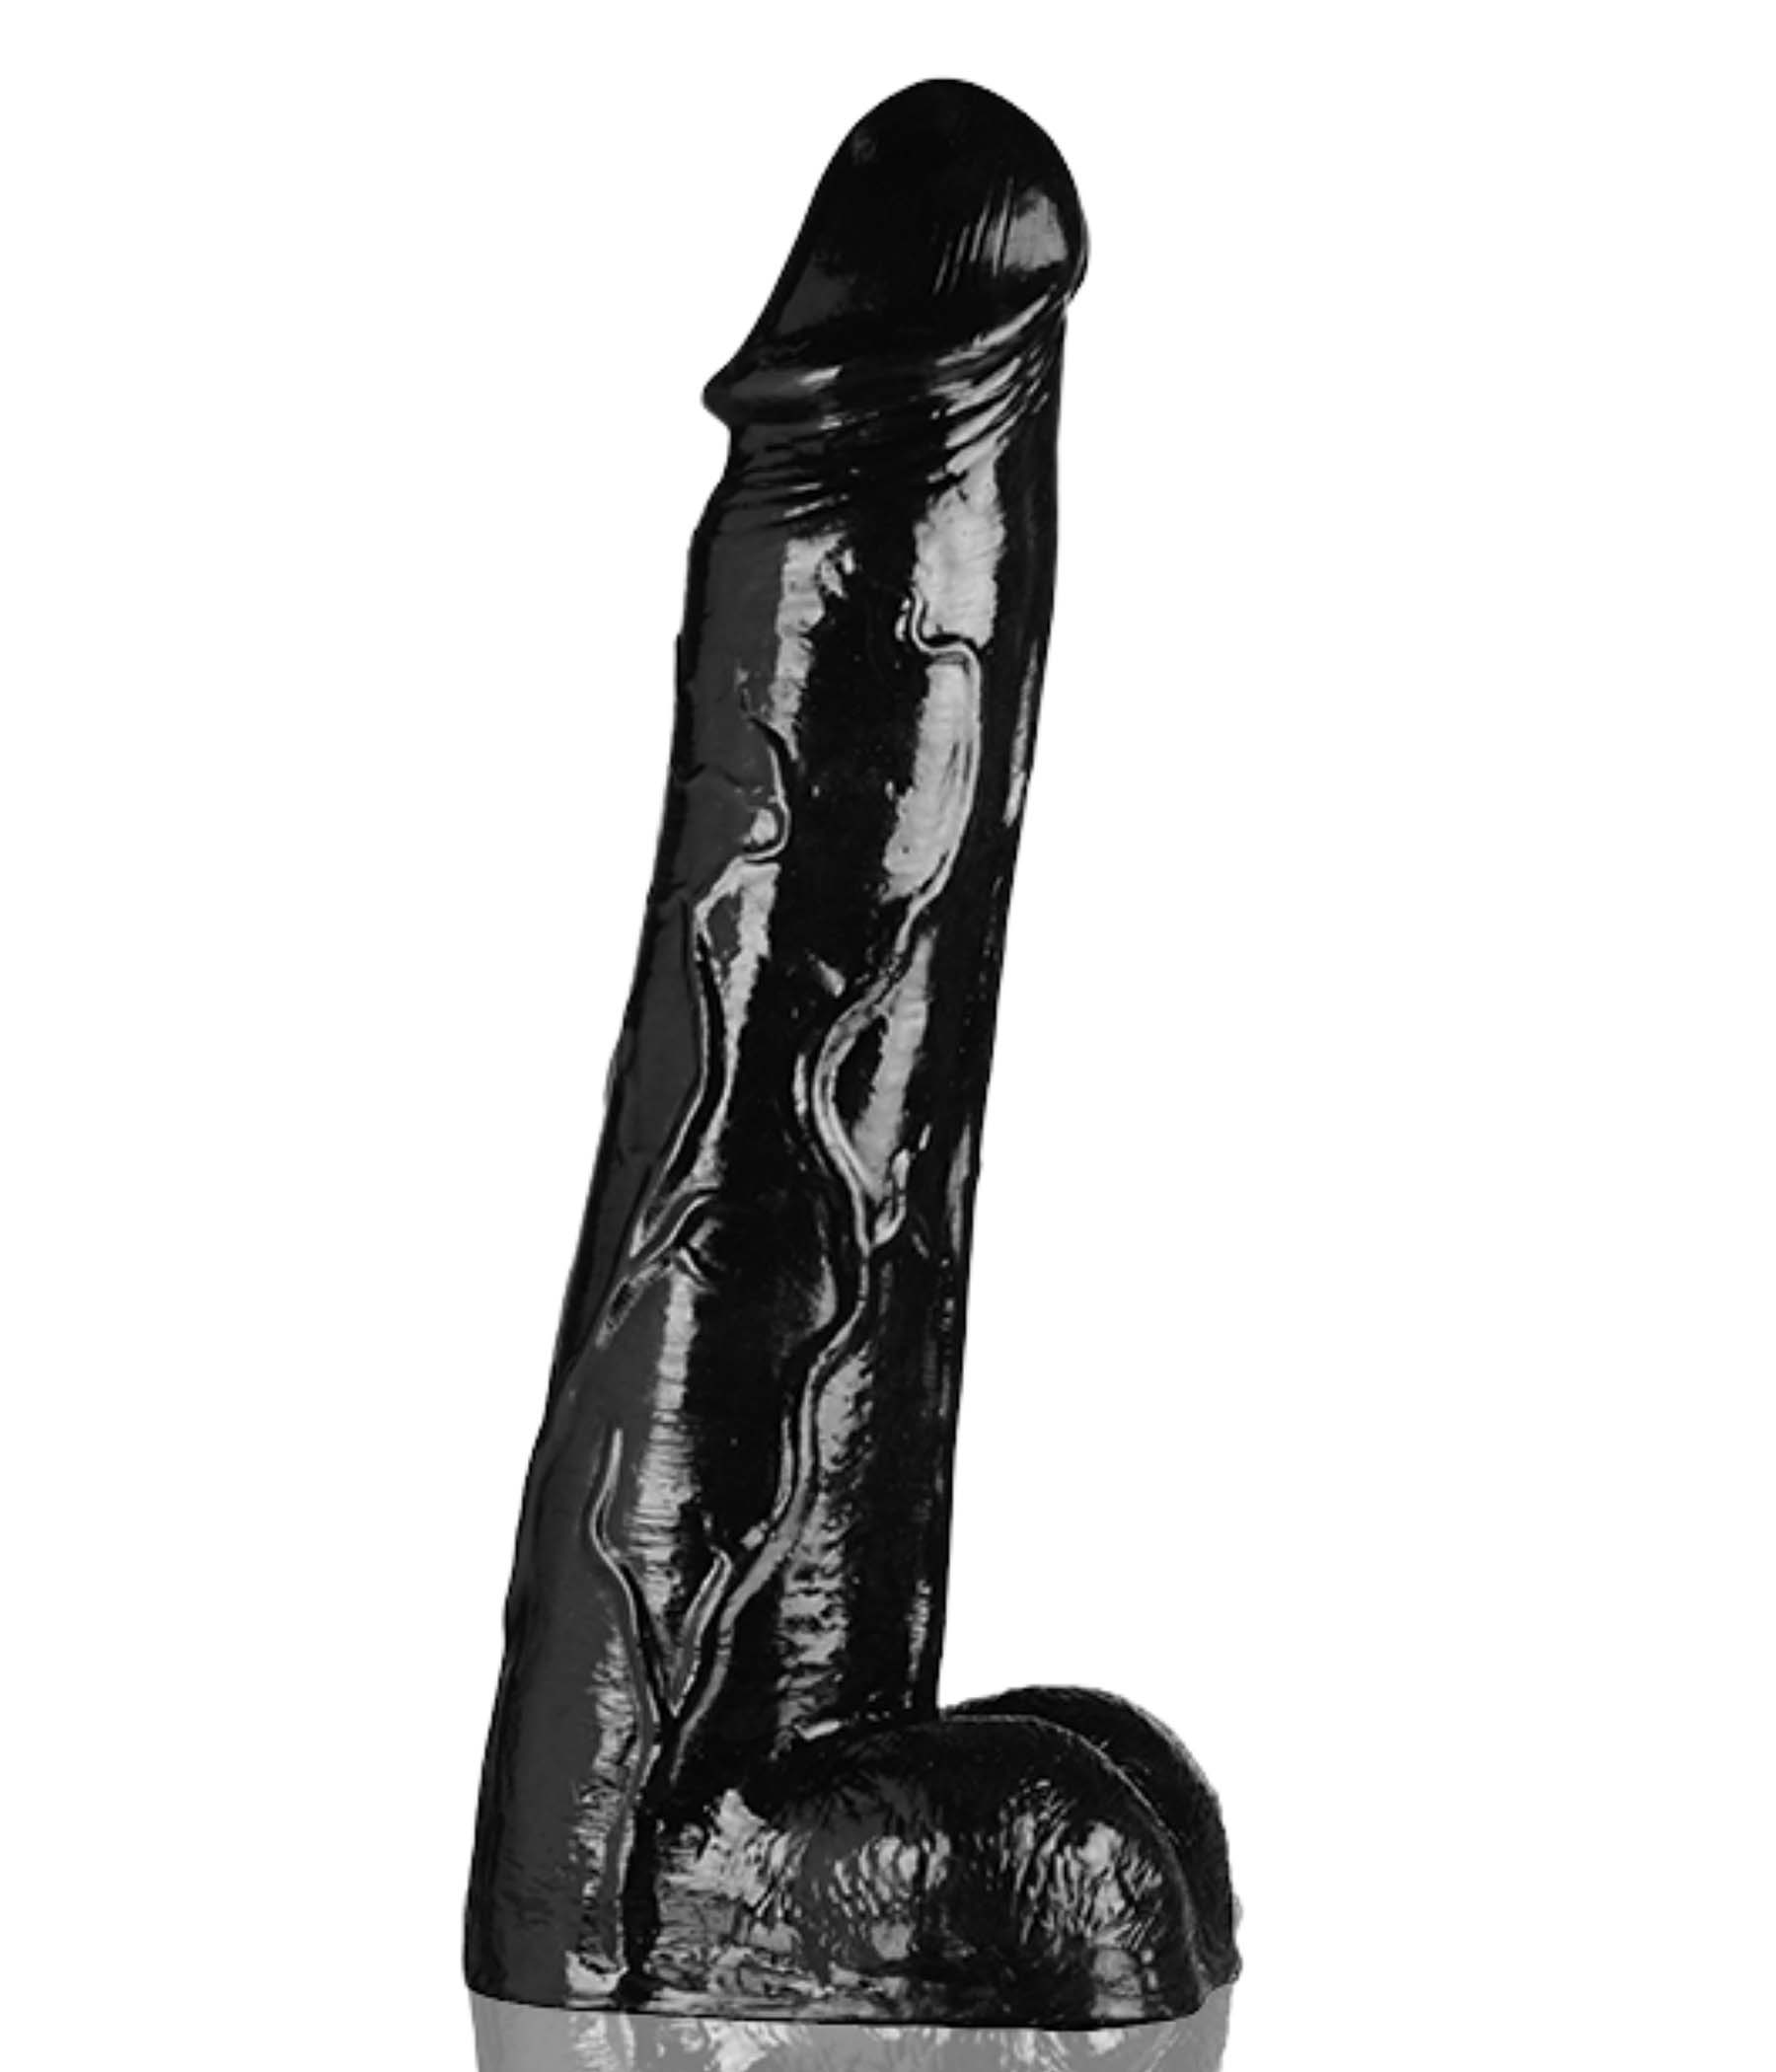 alexander strand recommends the moby huge dildo pic